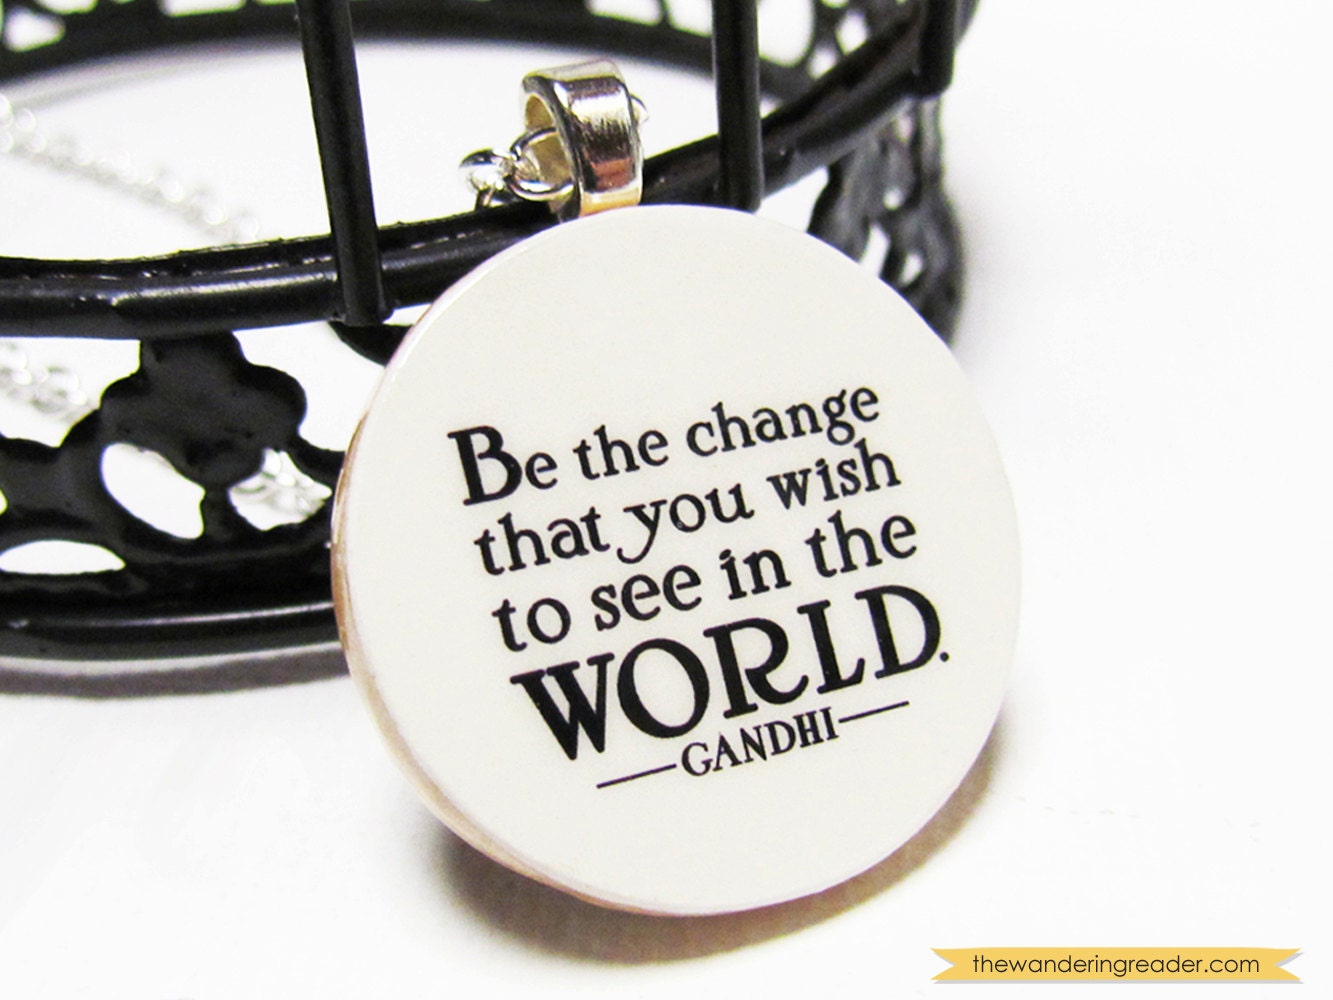 Be the change you wish to see in the world... Inspirational Gandhi Quote Necklace - Free US Shipping